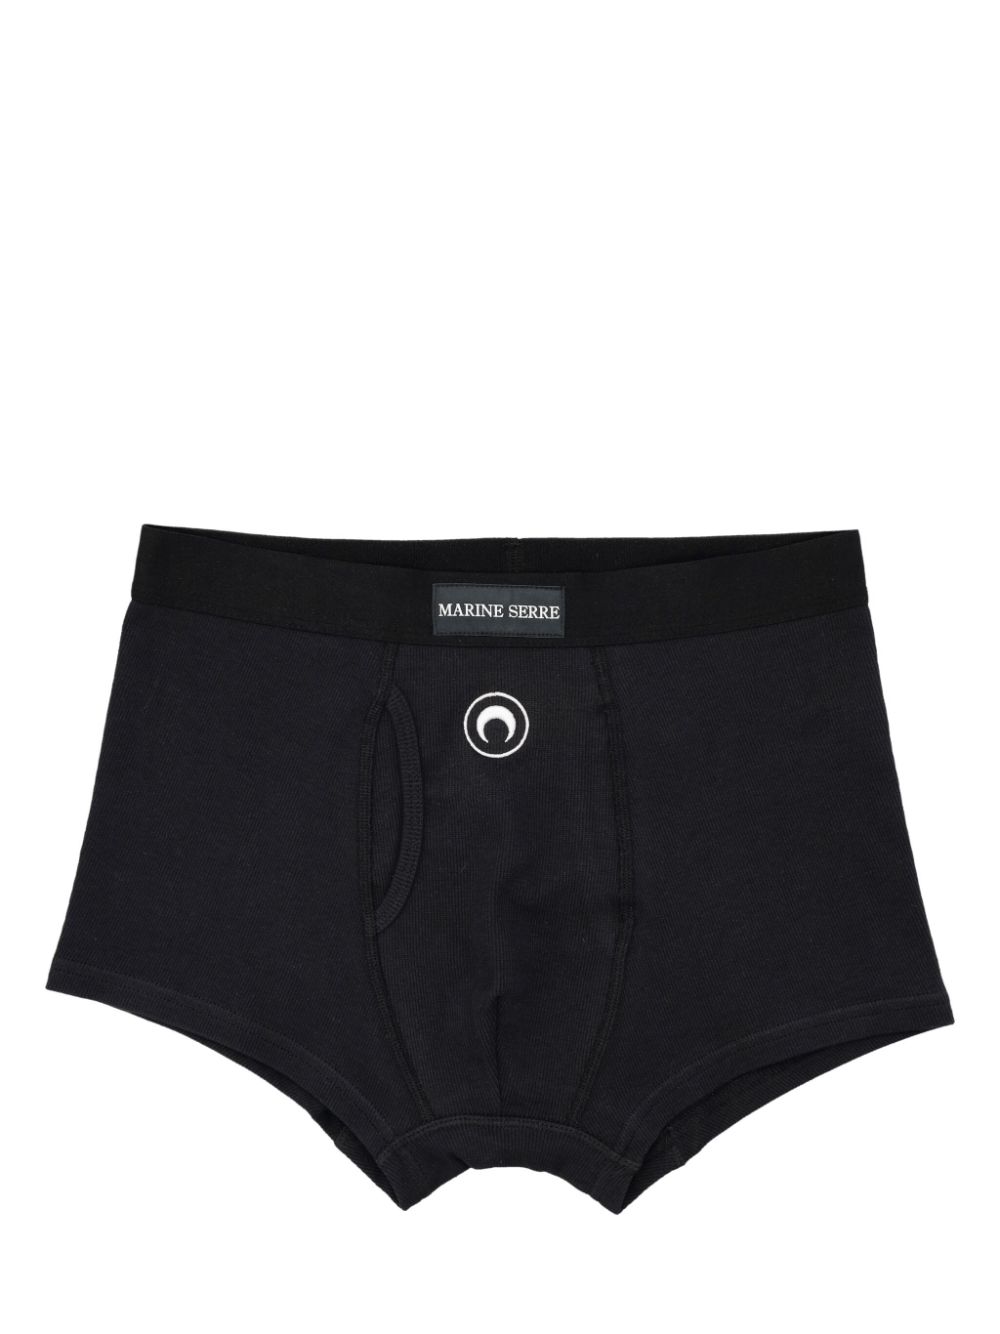 Marine Serre Crescent Moon-embroidered Boxers In Black